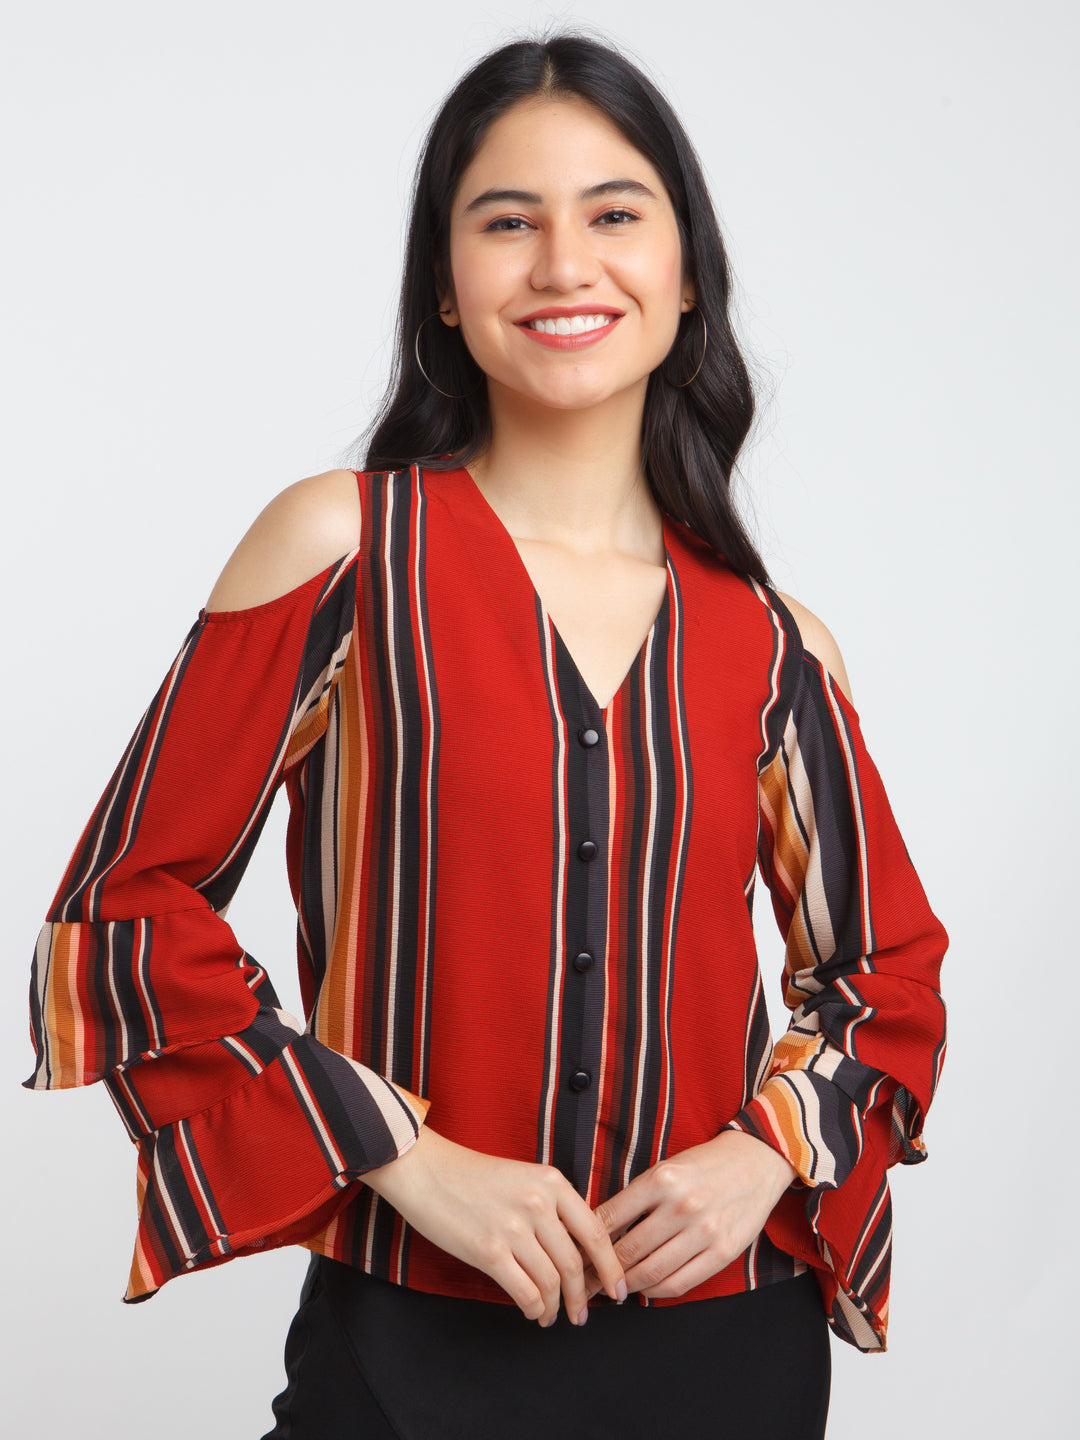 Multicolored Printed Flared Sleeve Top For Women